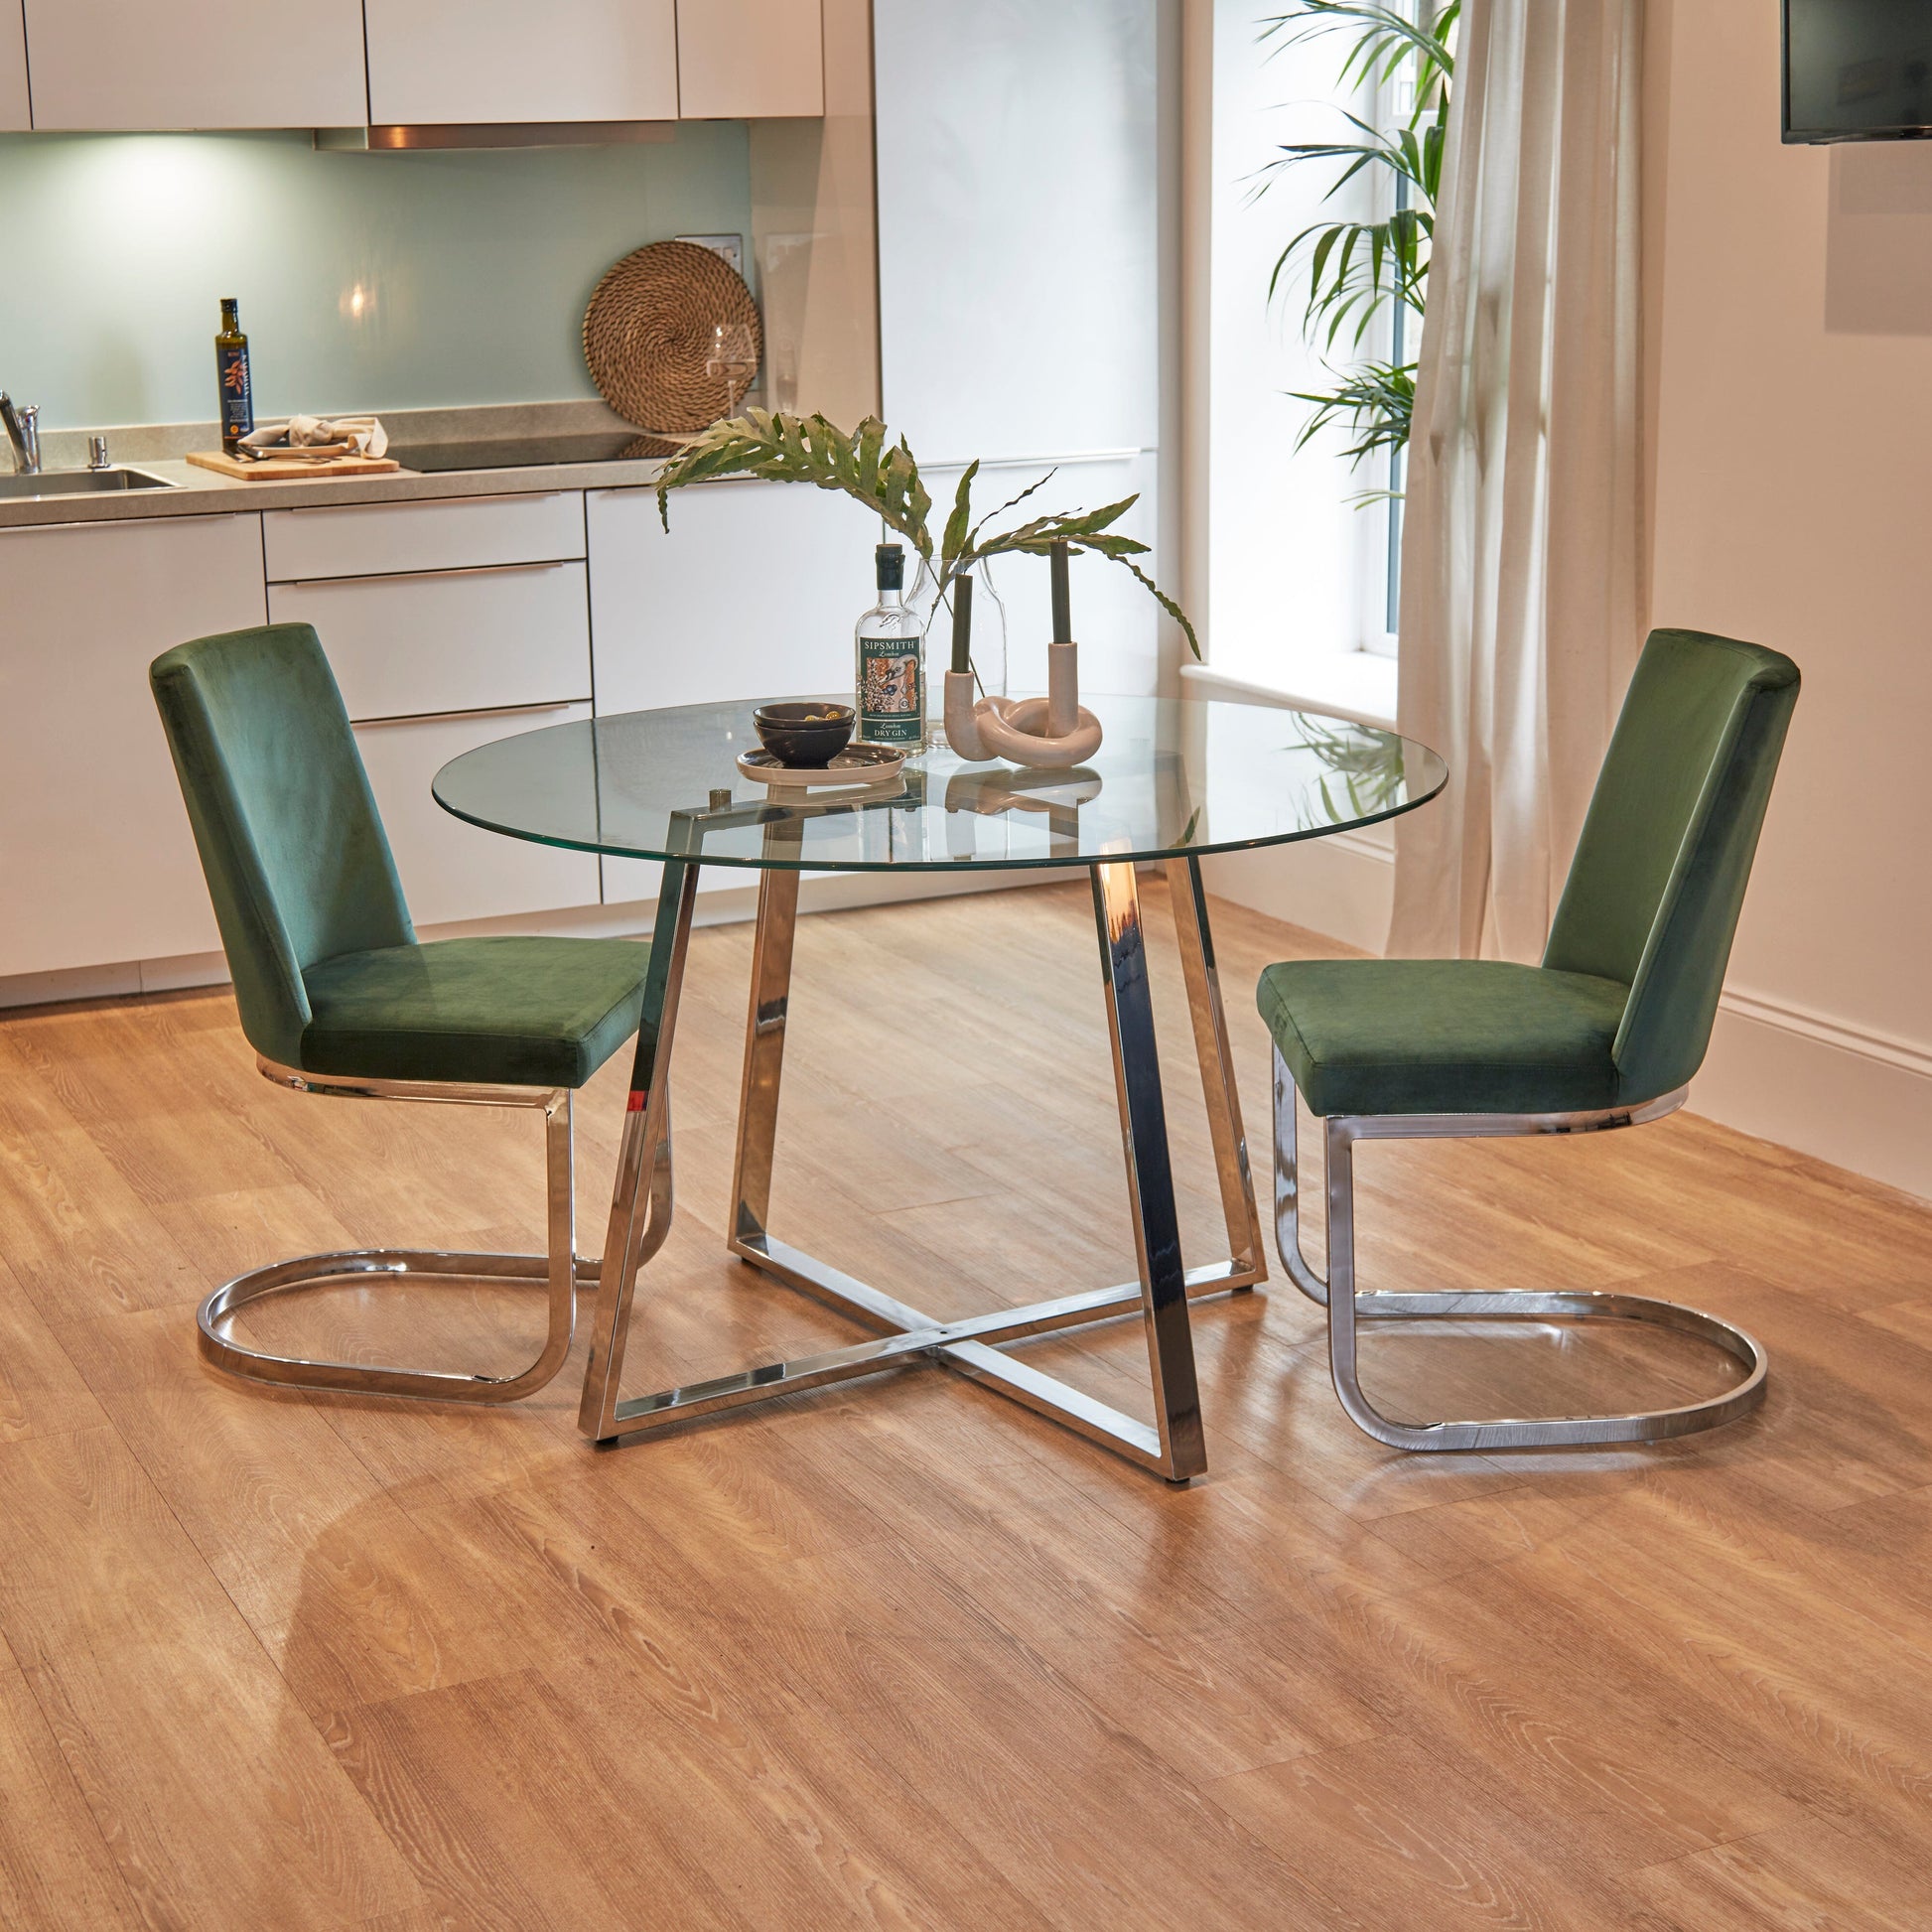 Clara Glass Dining Table Set - 4 Seater - Lola Green Dining Chairs with Chrome Legs - Laura James